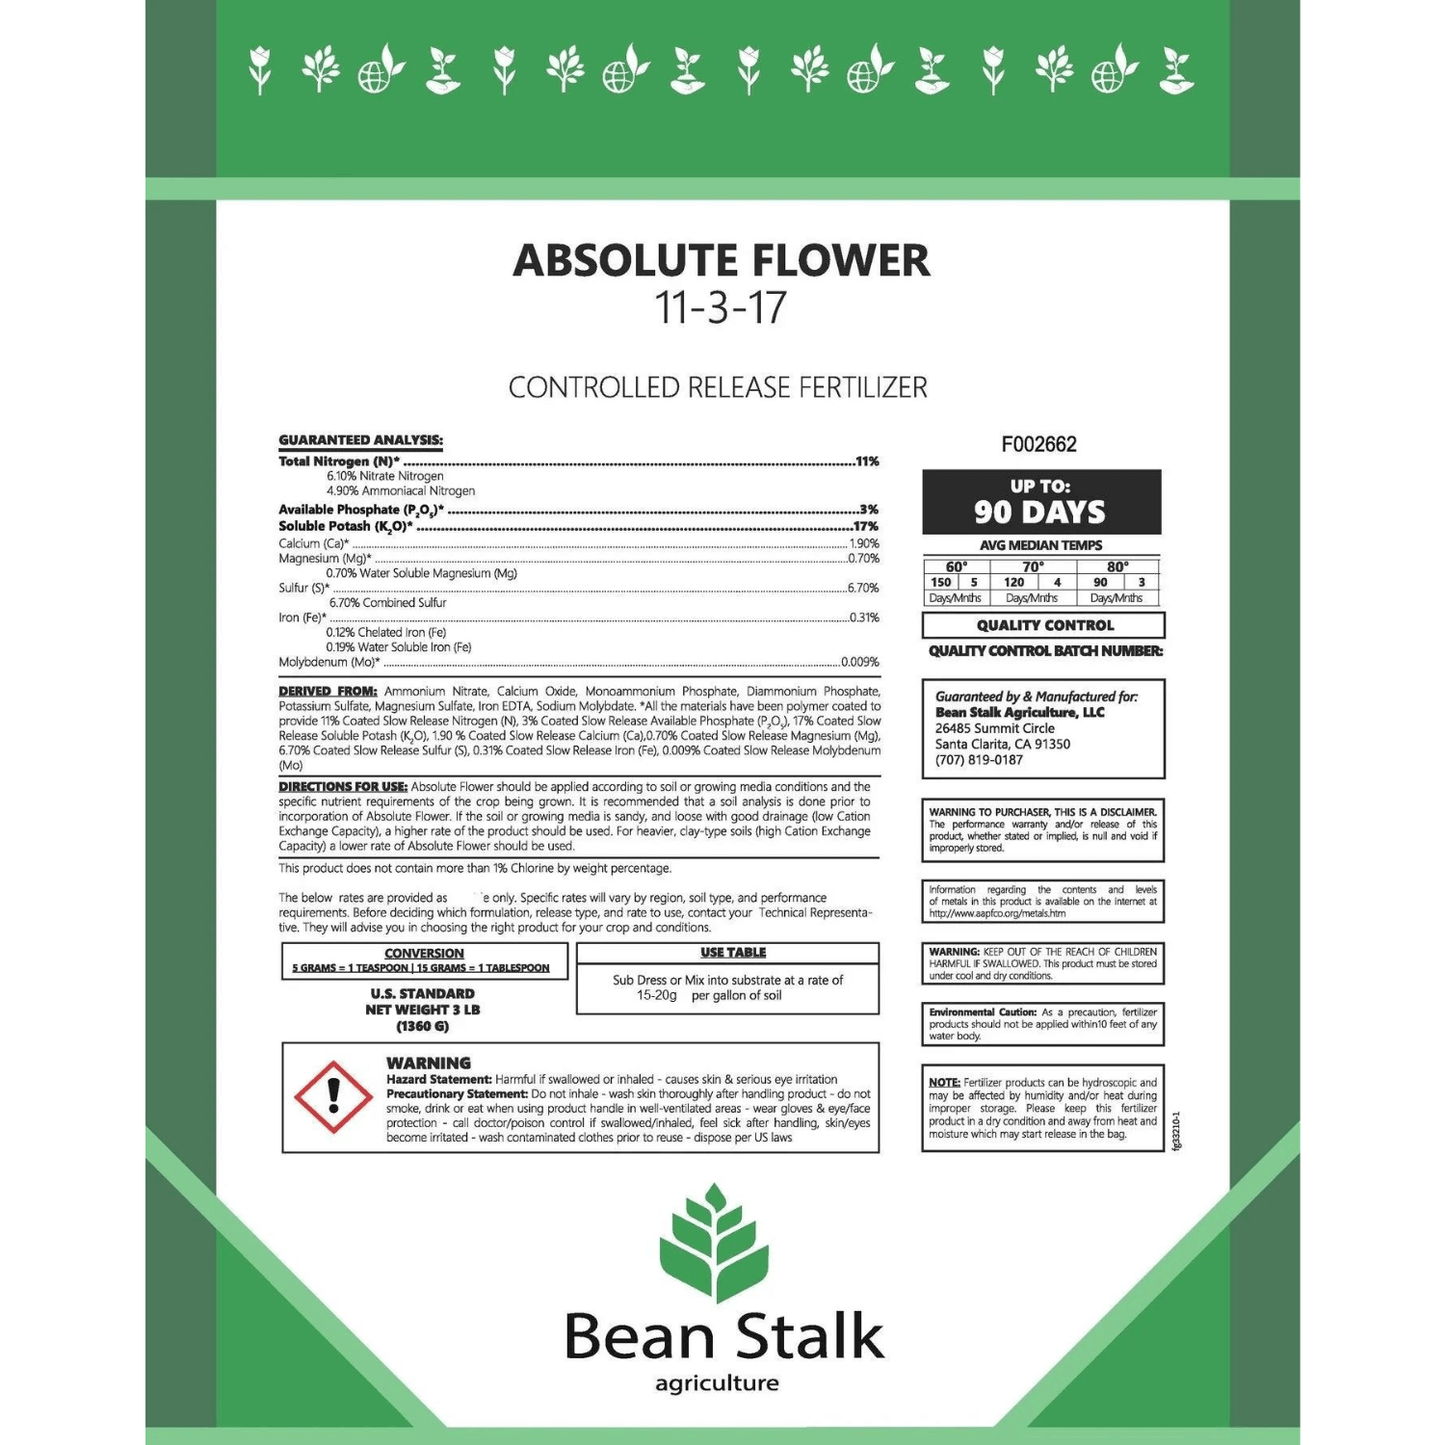 Beanstalk Absolute Flower Controlled Release Fertilizer for Flower, 3 lb Pouch BSA-AF3 Planting & Watering